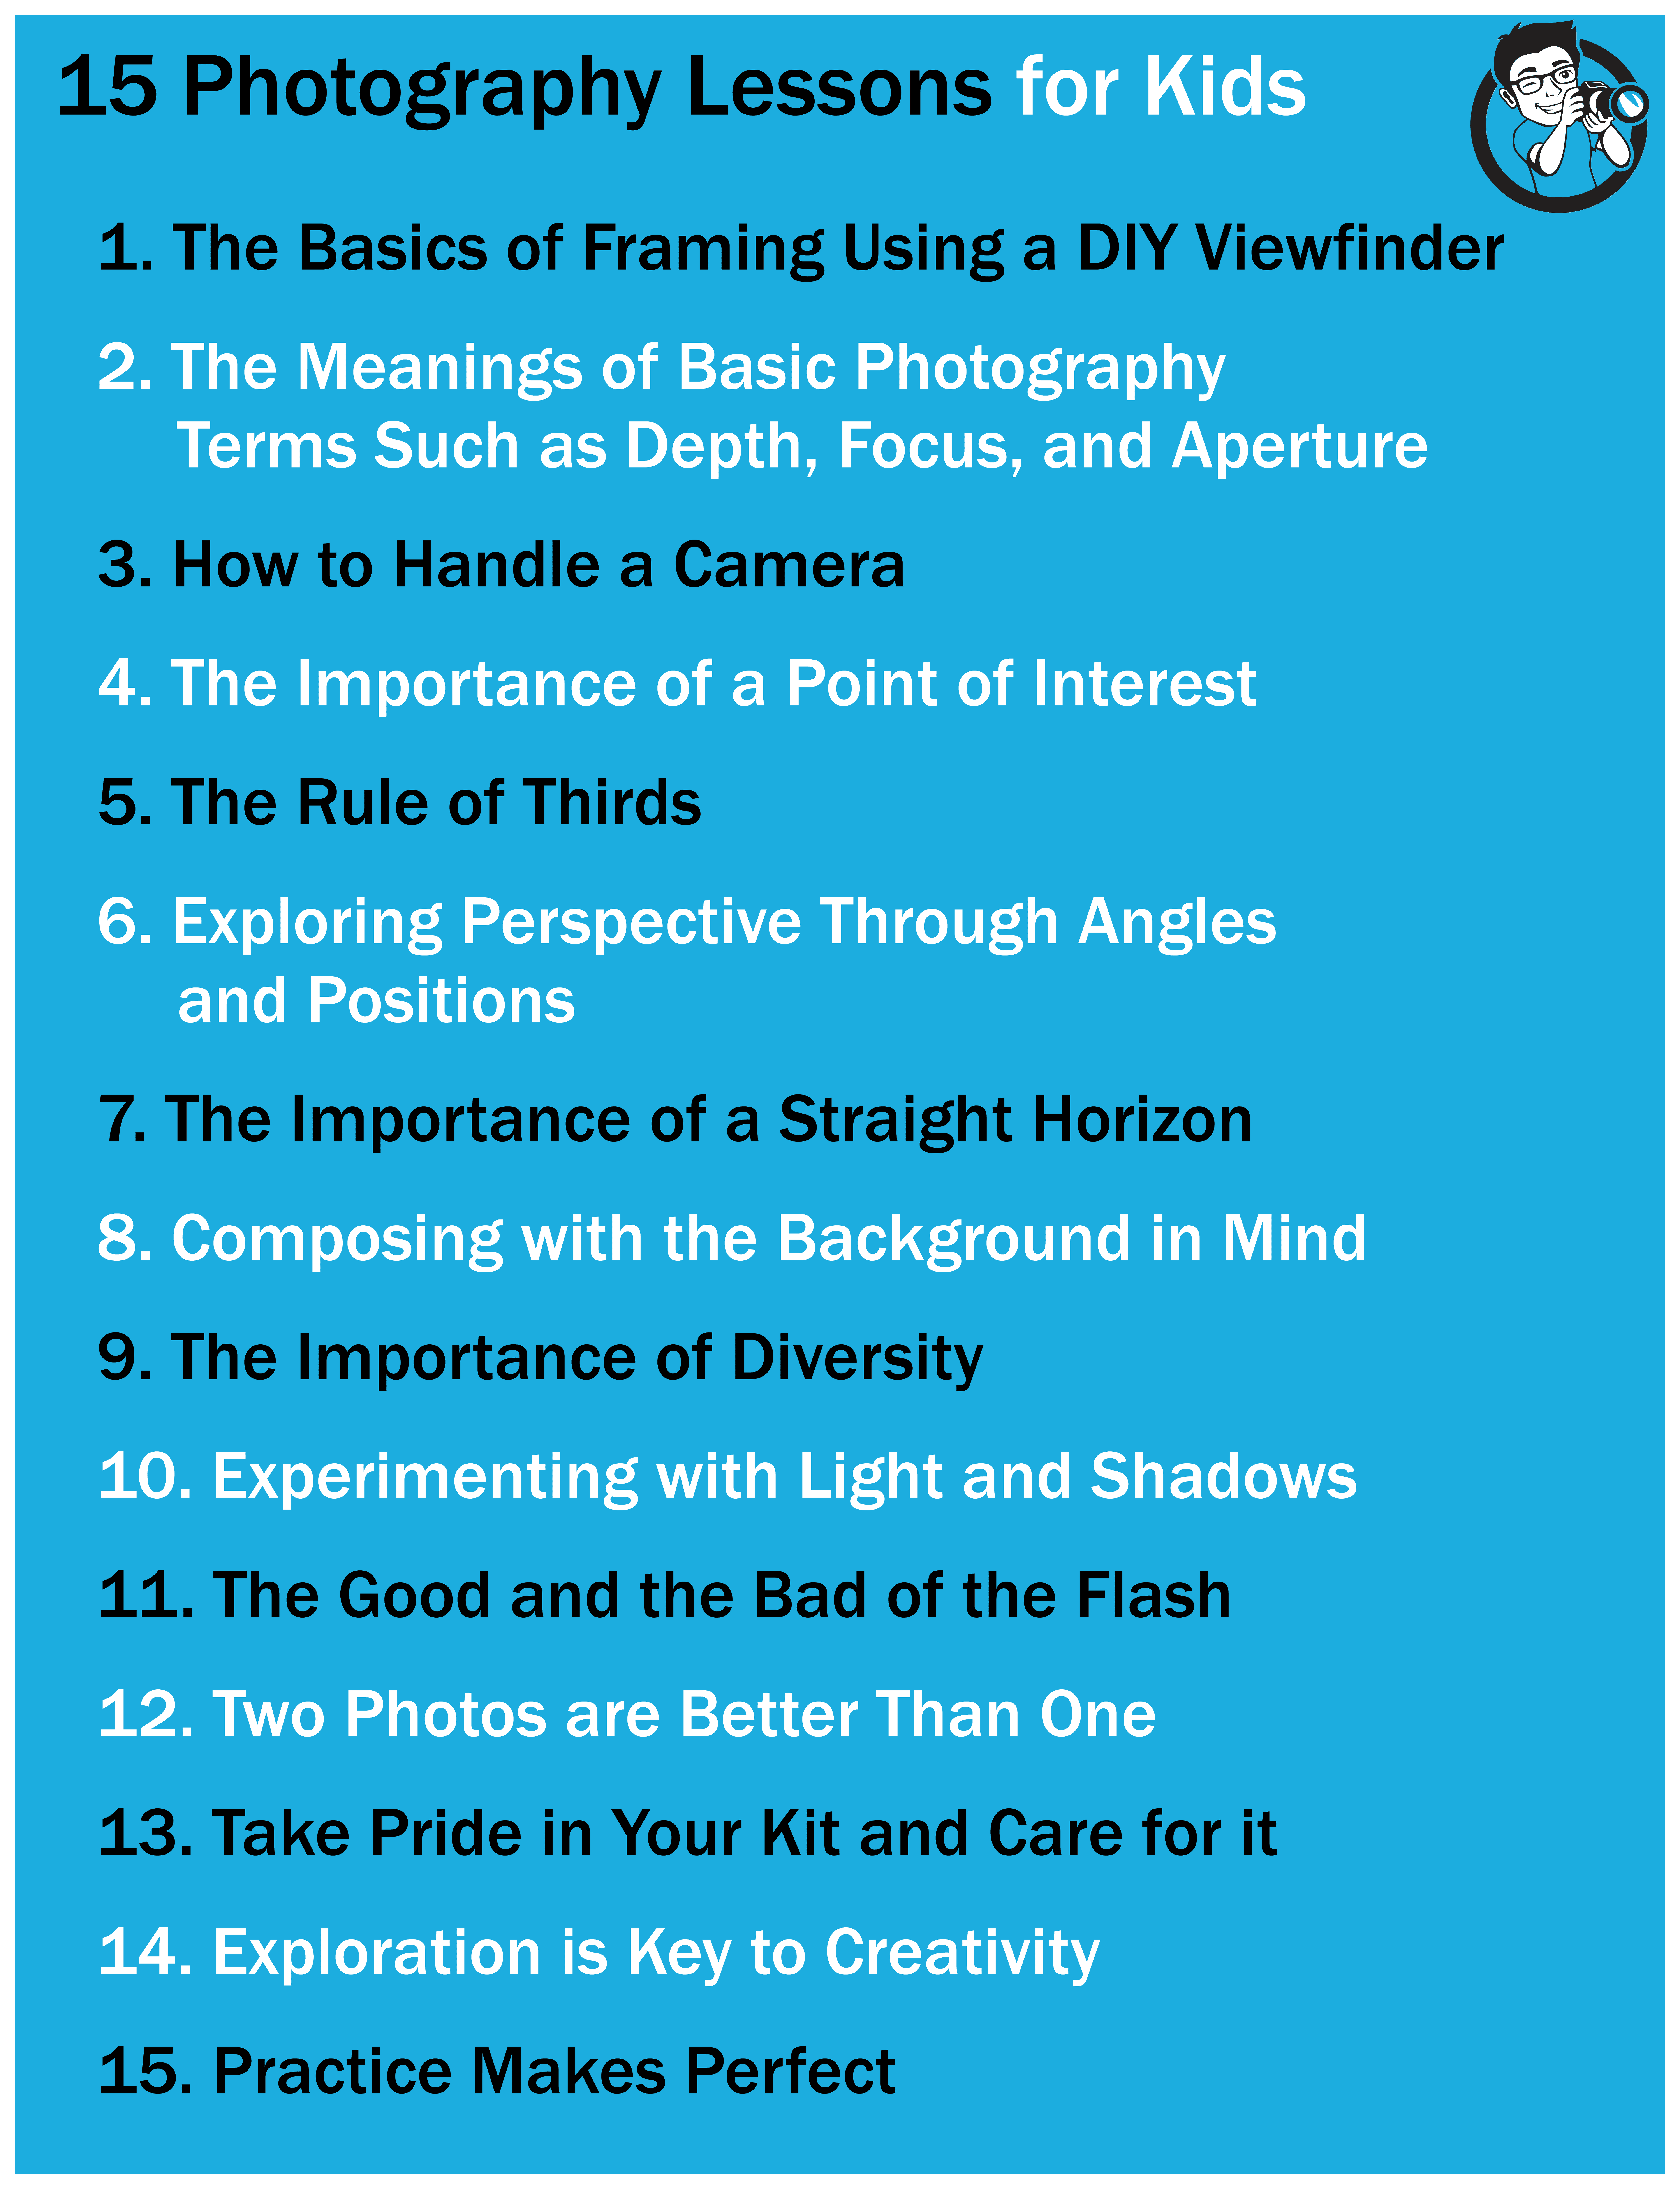 Summary of the 15 photography lessons for kids.